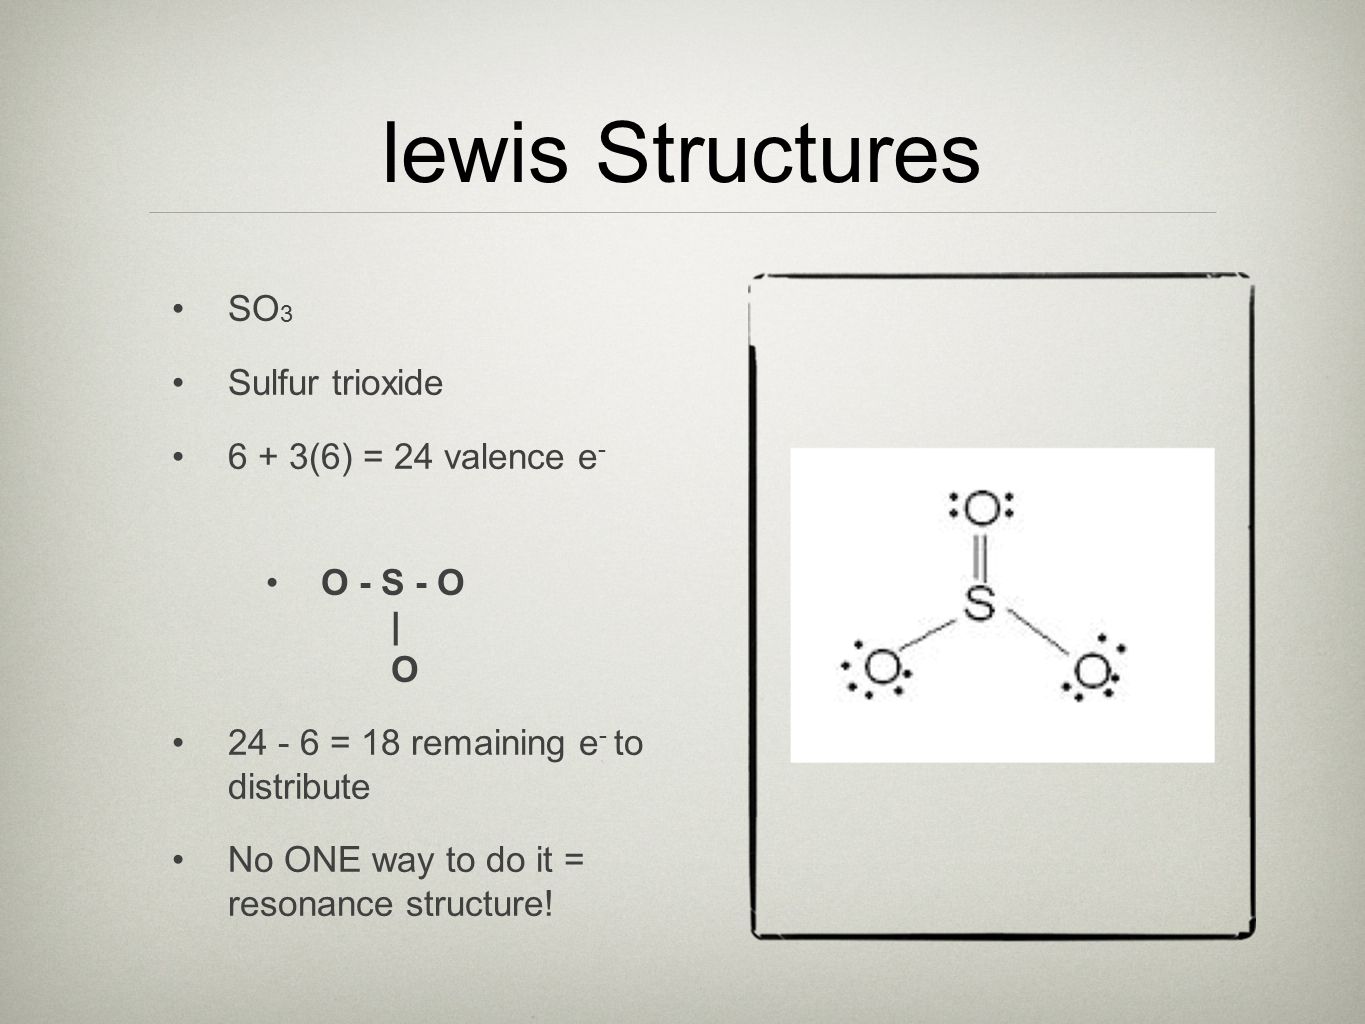 The lewis dot structure for so 3. 